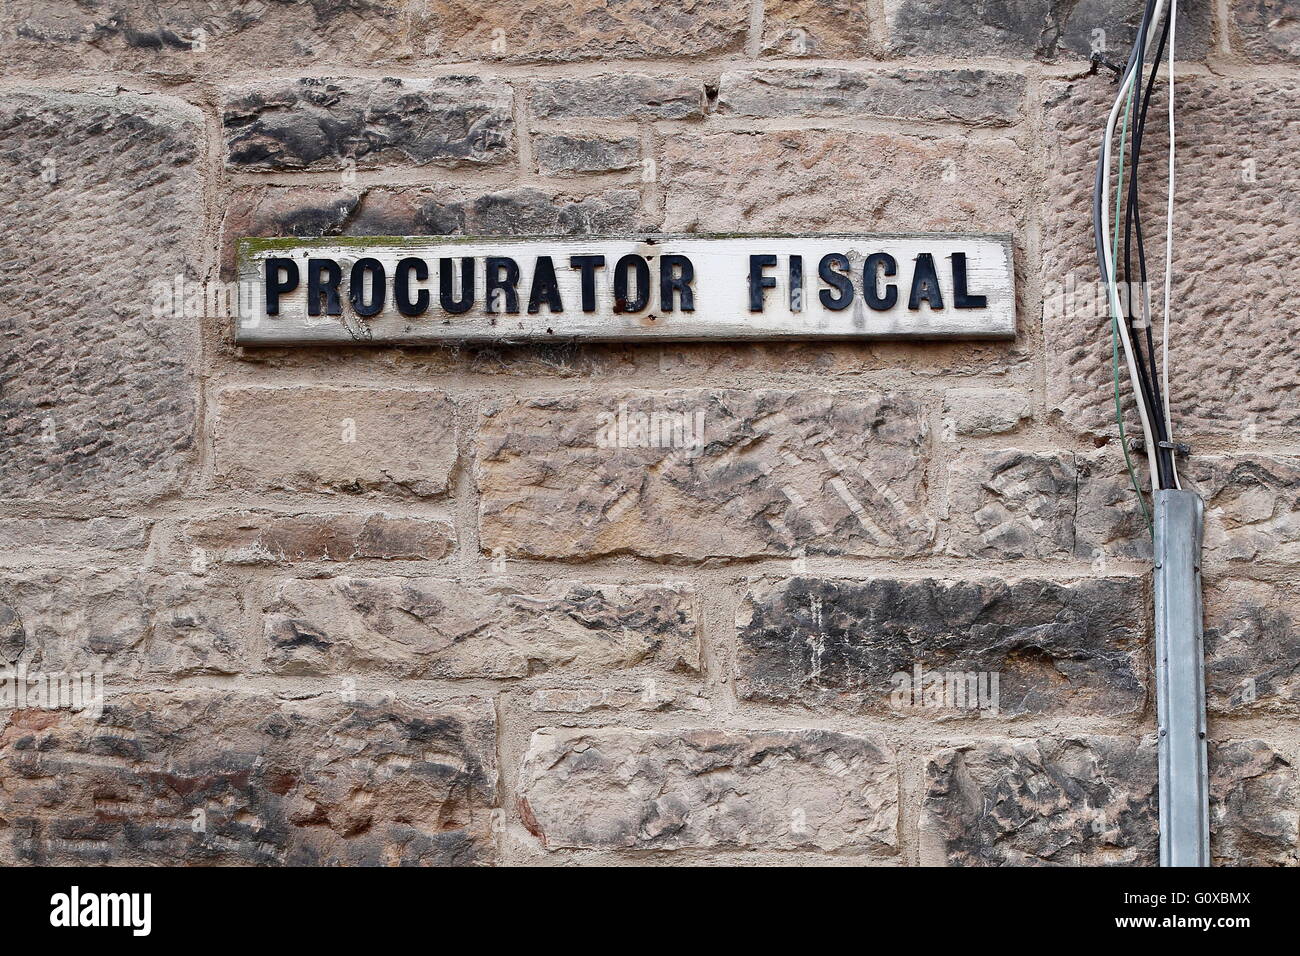 A sign on the wall of a car park in Jedburgh, Scotland, indicates where the Procurator Fiscal's car parking space is situated. Stock Photo